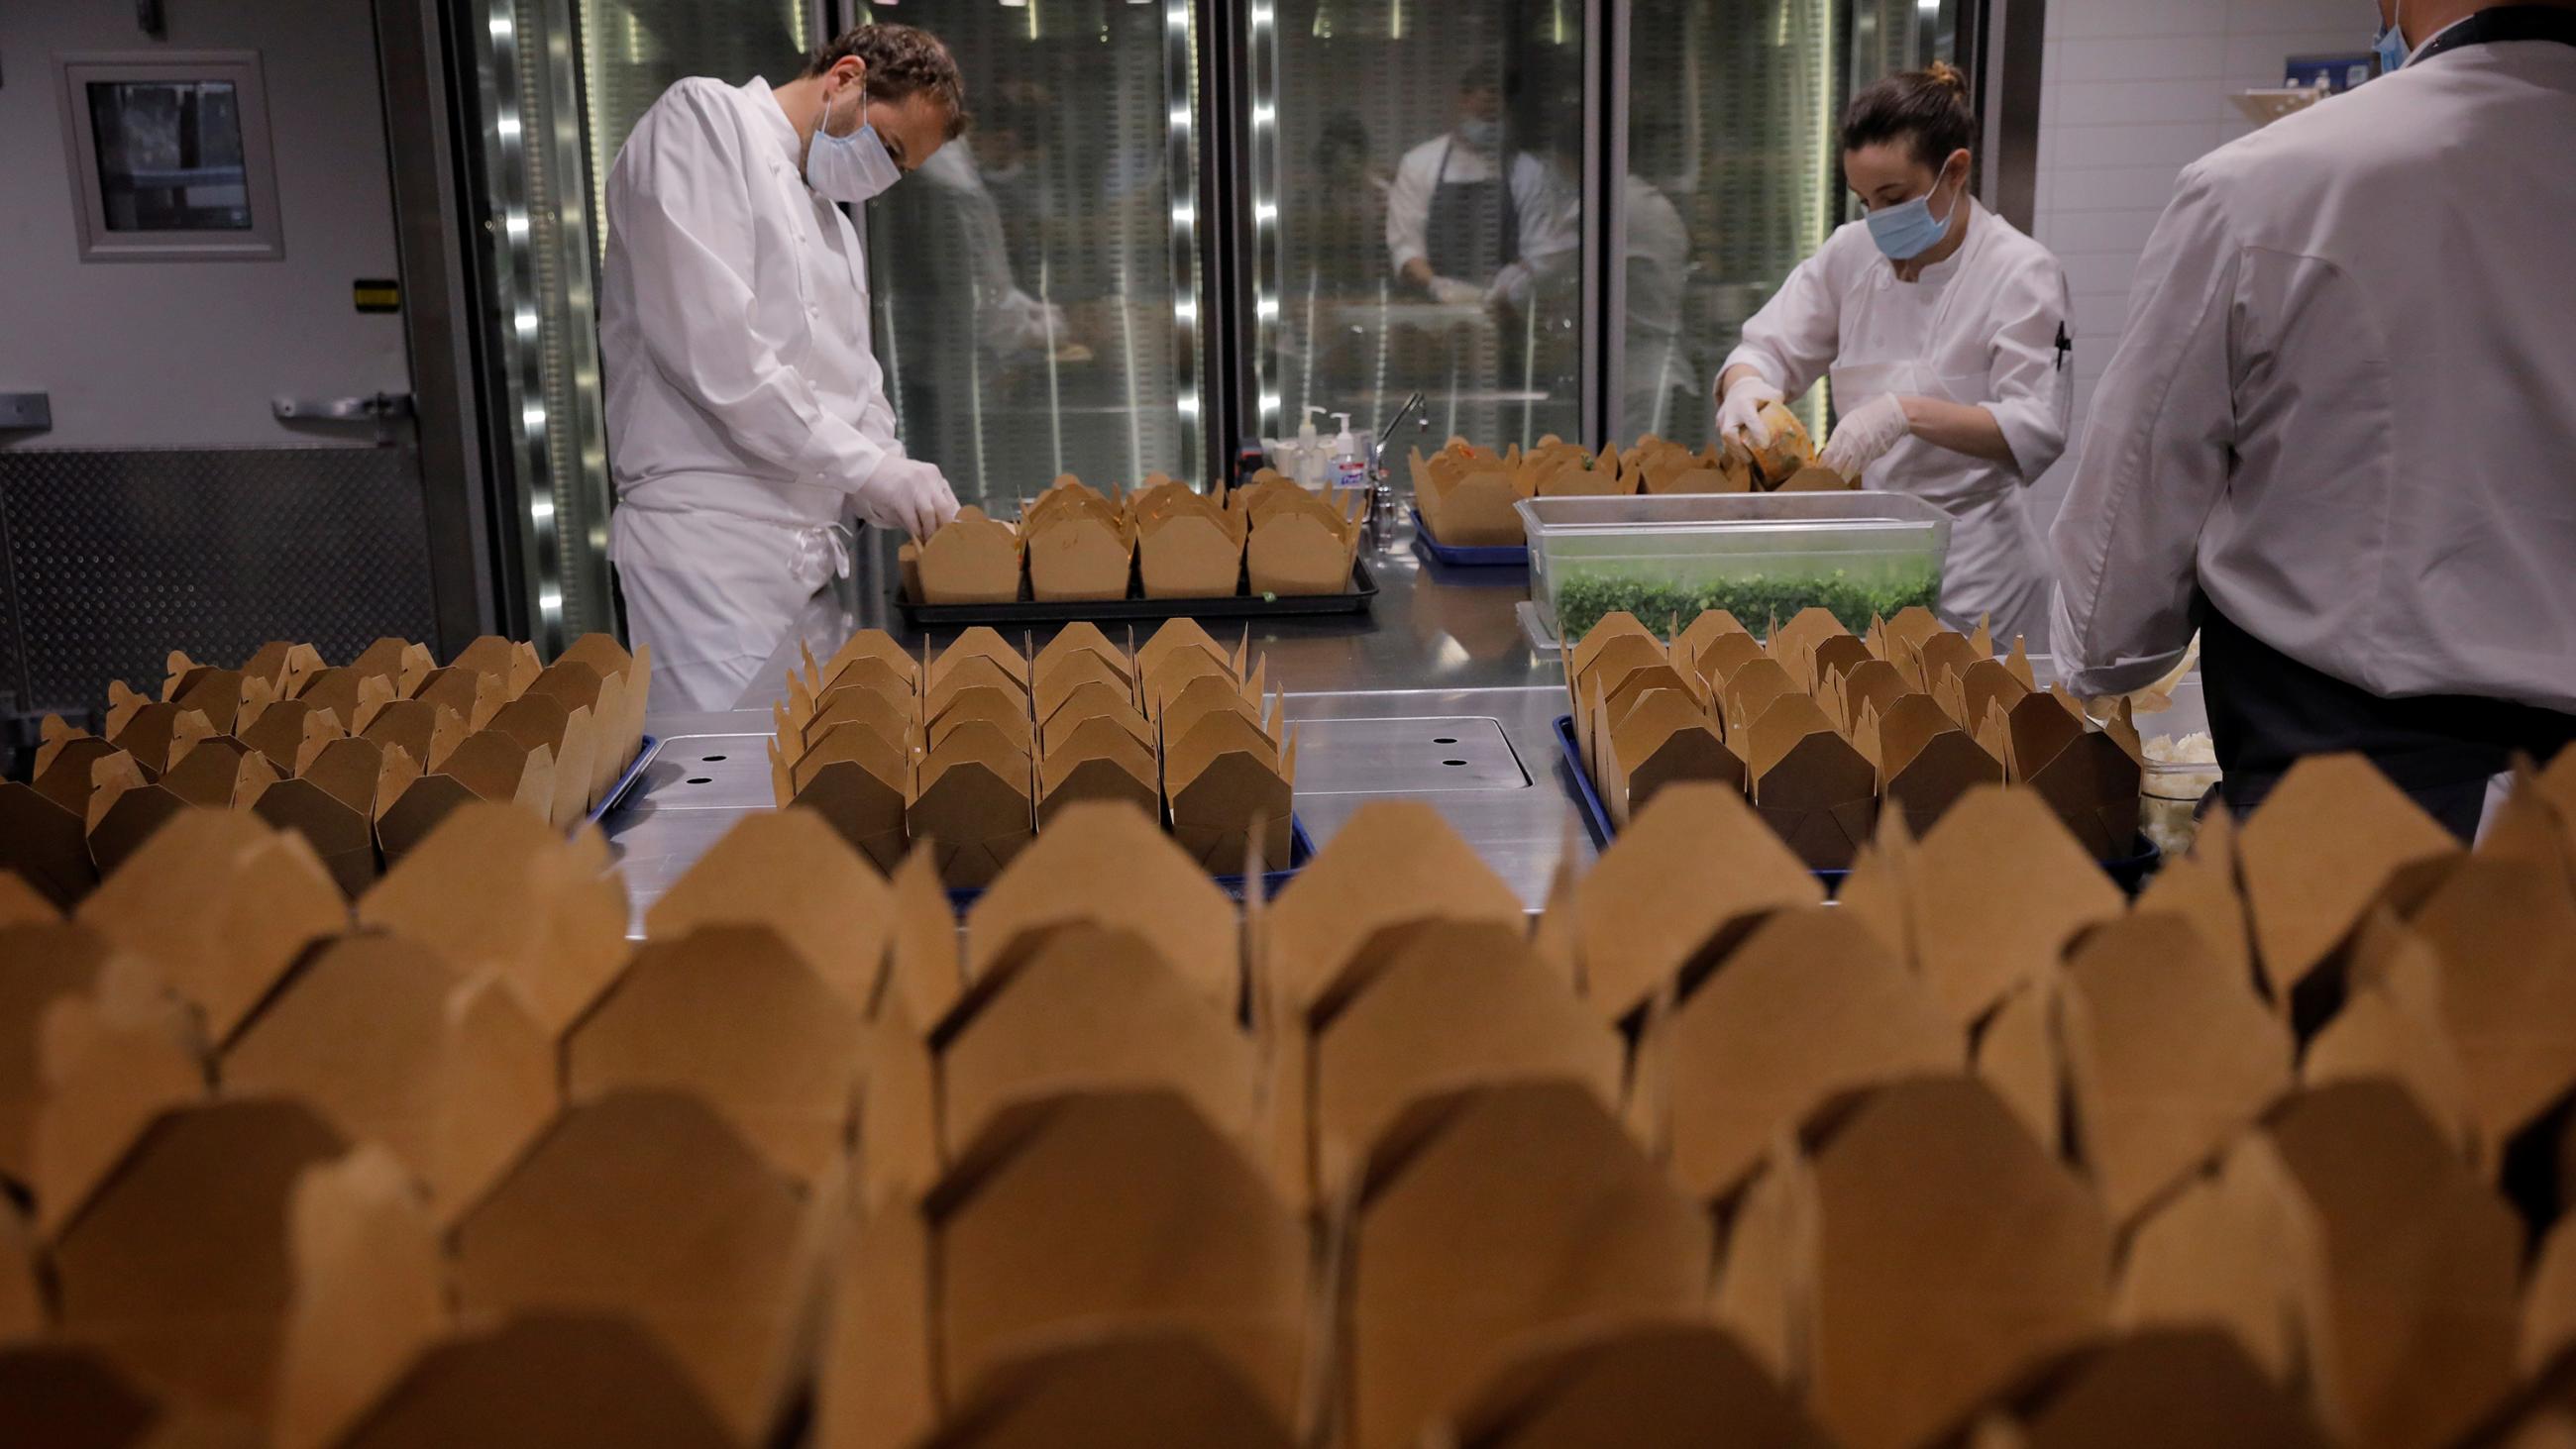 Picture shows a table filled with paper clamshell boxes open while chefs fill them with food. 